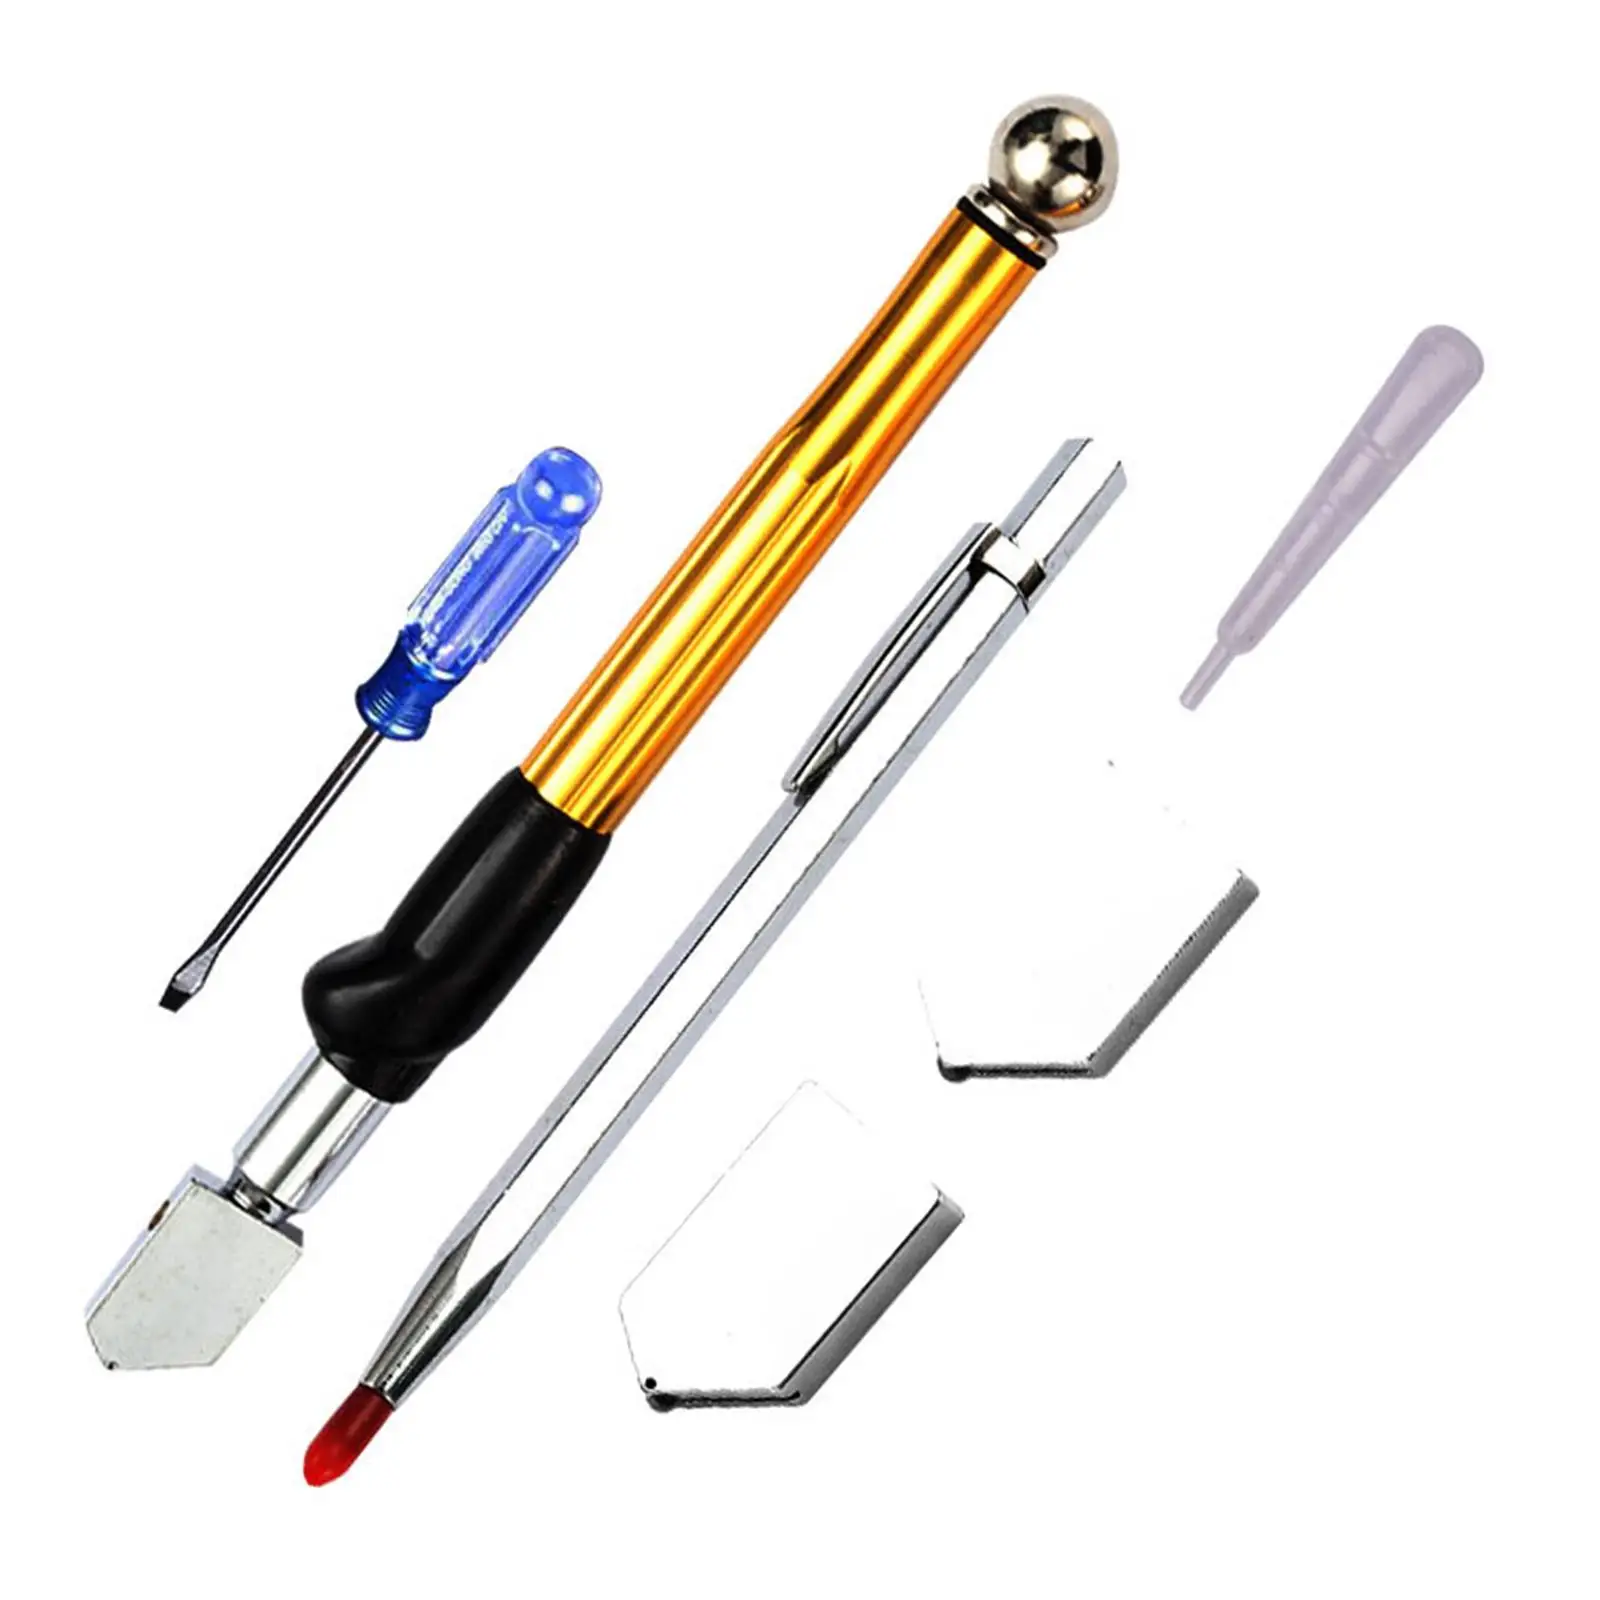 Glass Cutter Ceramic Tiles Hand Tools Professional Mirror Glass Breaker Easy to Glide Glass Cutting Cutting Tool